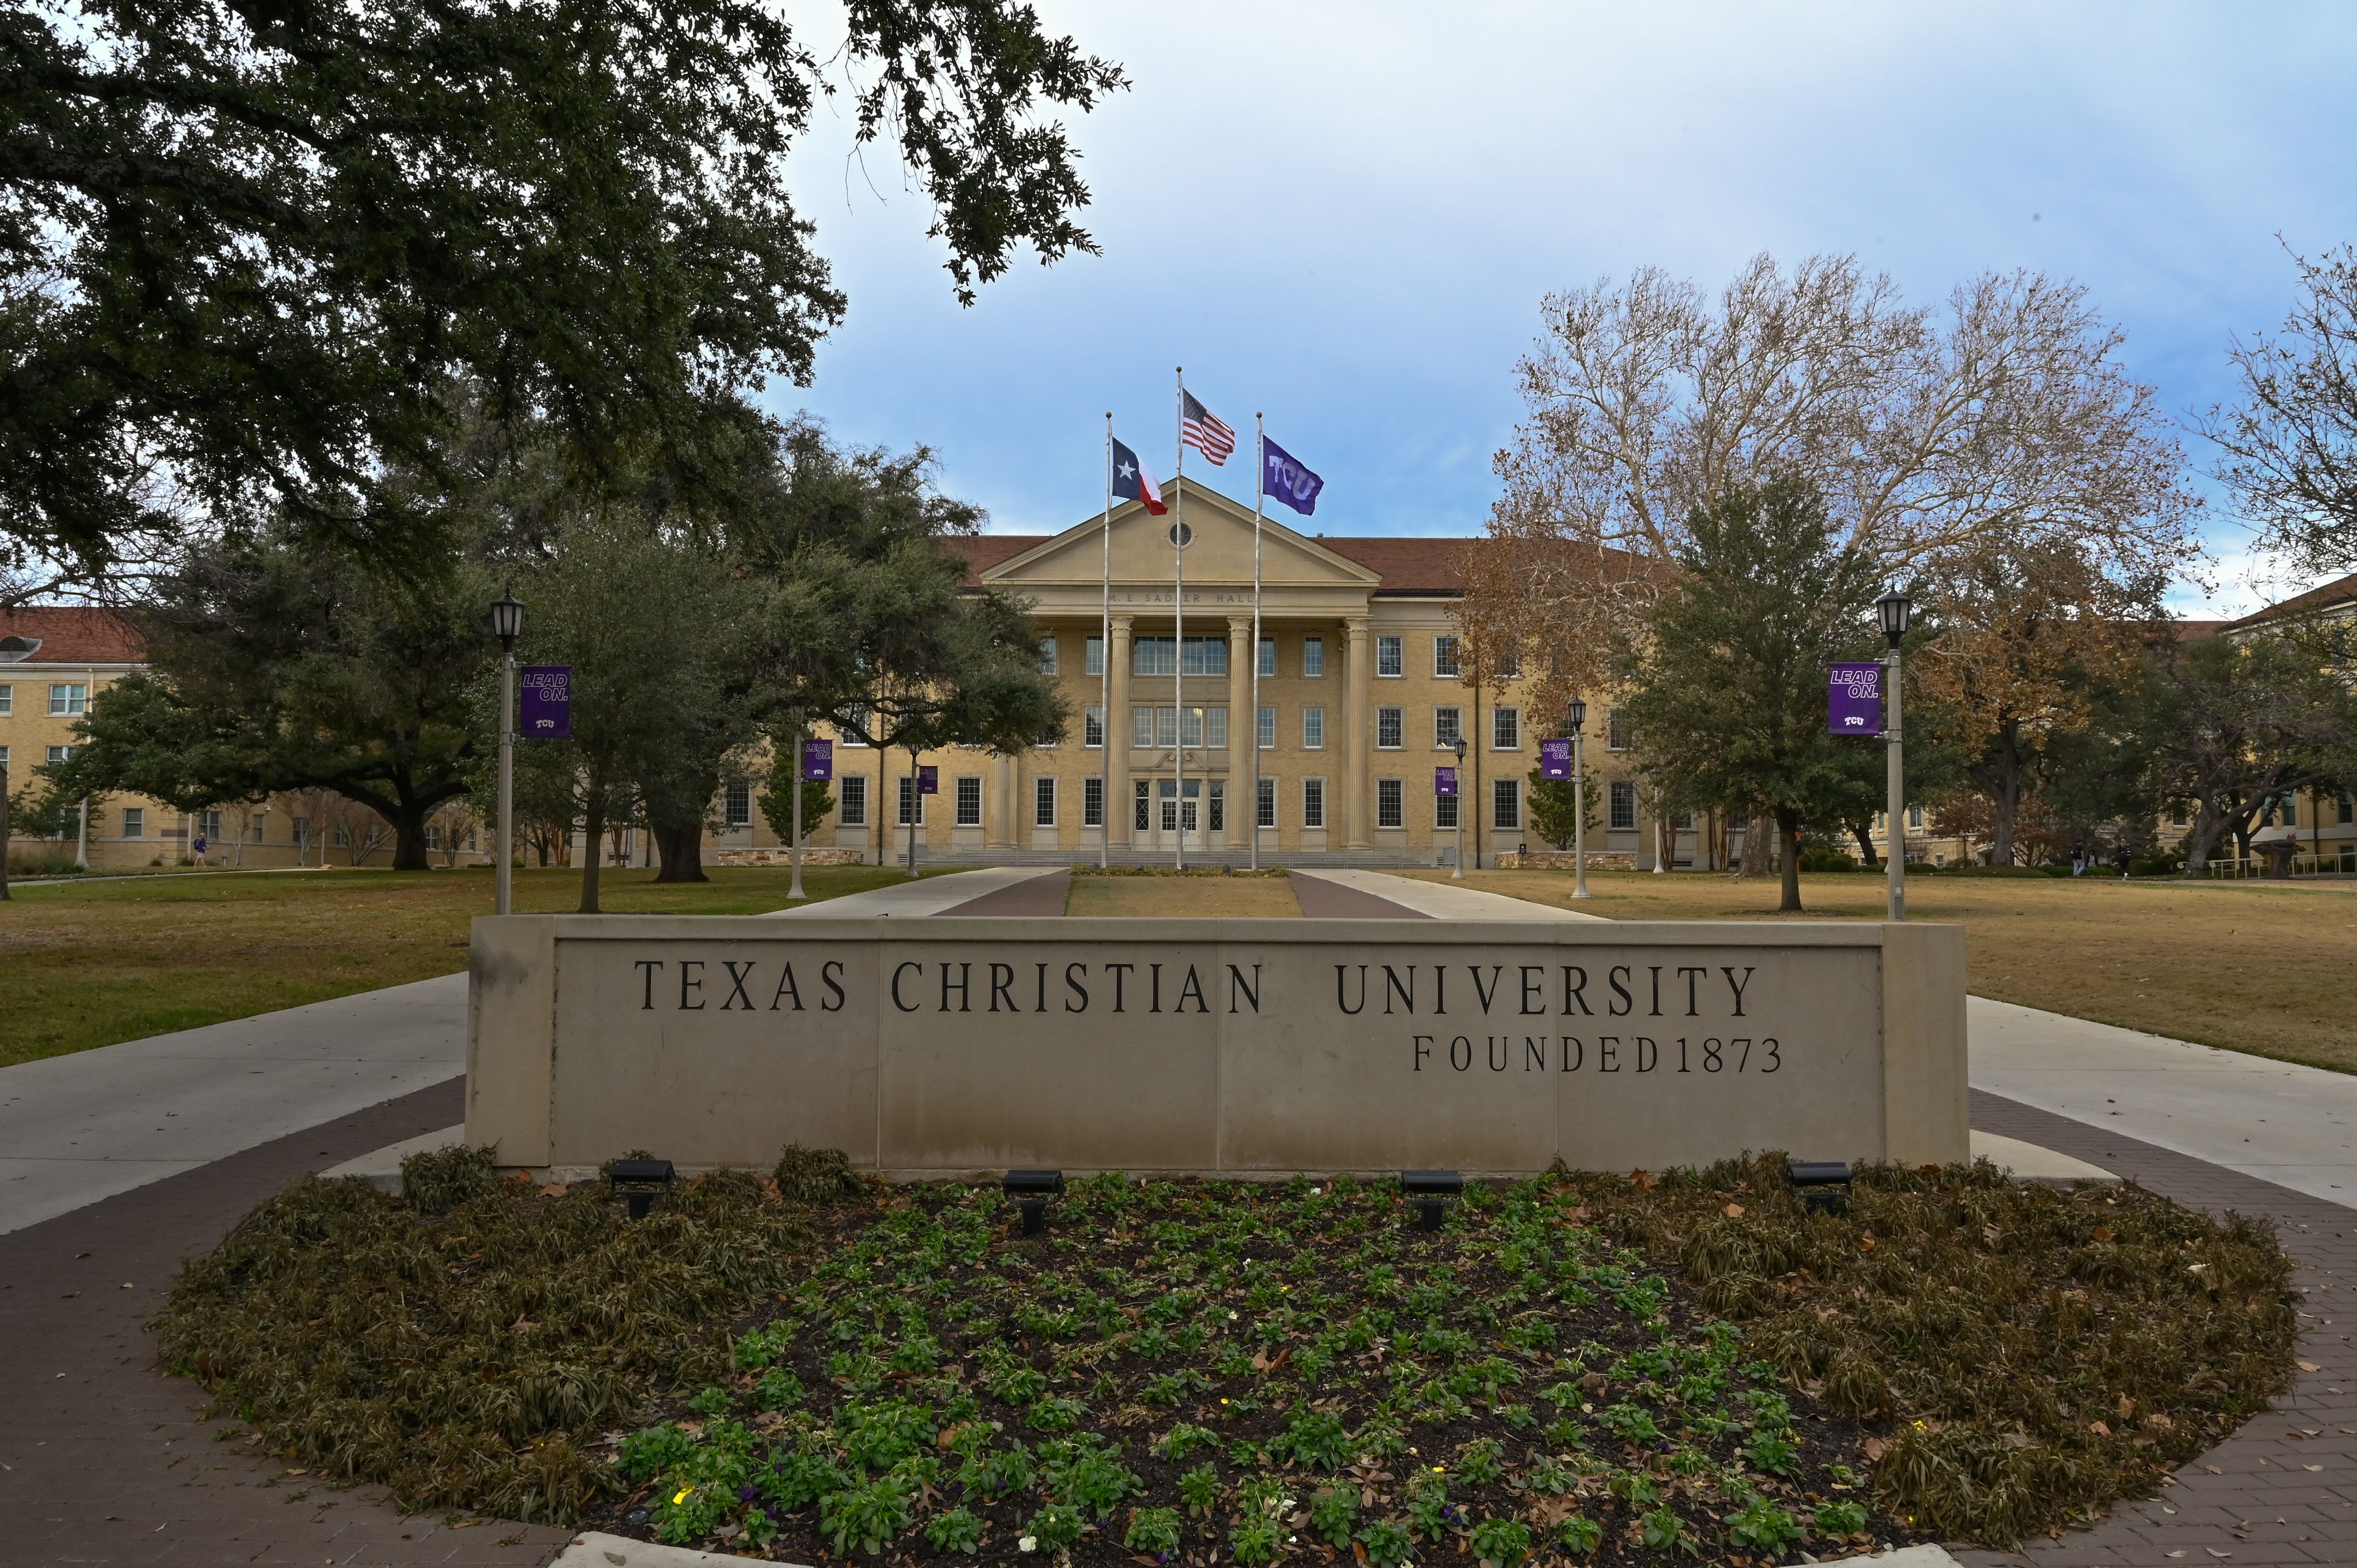 A view of Sadler Hall on the campus of Texas Christian University in Fort Worth, Texas in January 2022. TCU is celebrating it's 150th anniversary in fall 2022. Photo by Claire Powell.